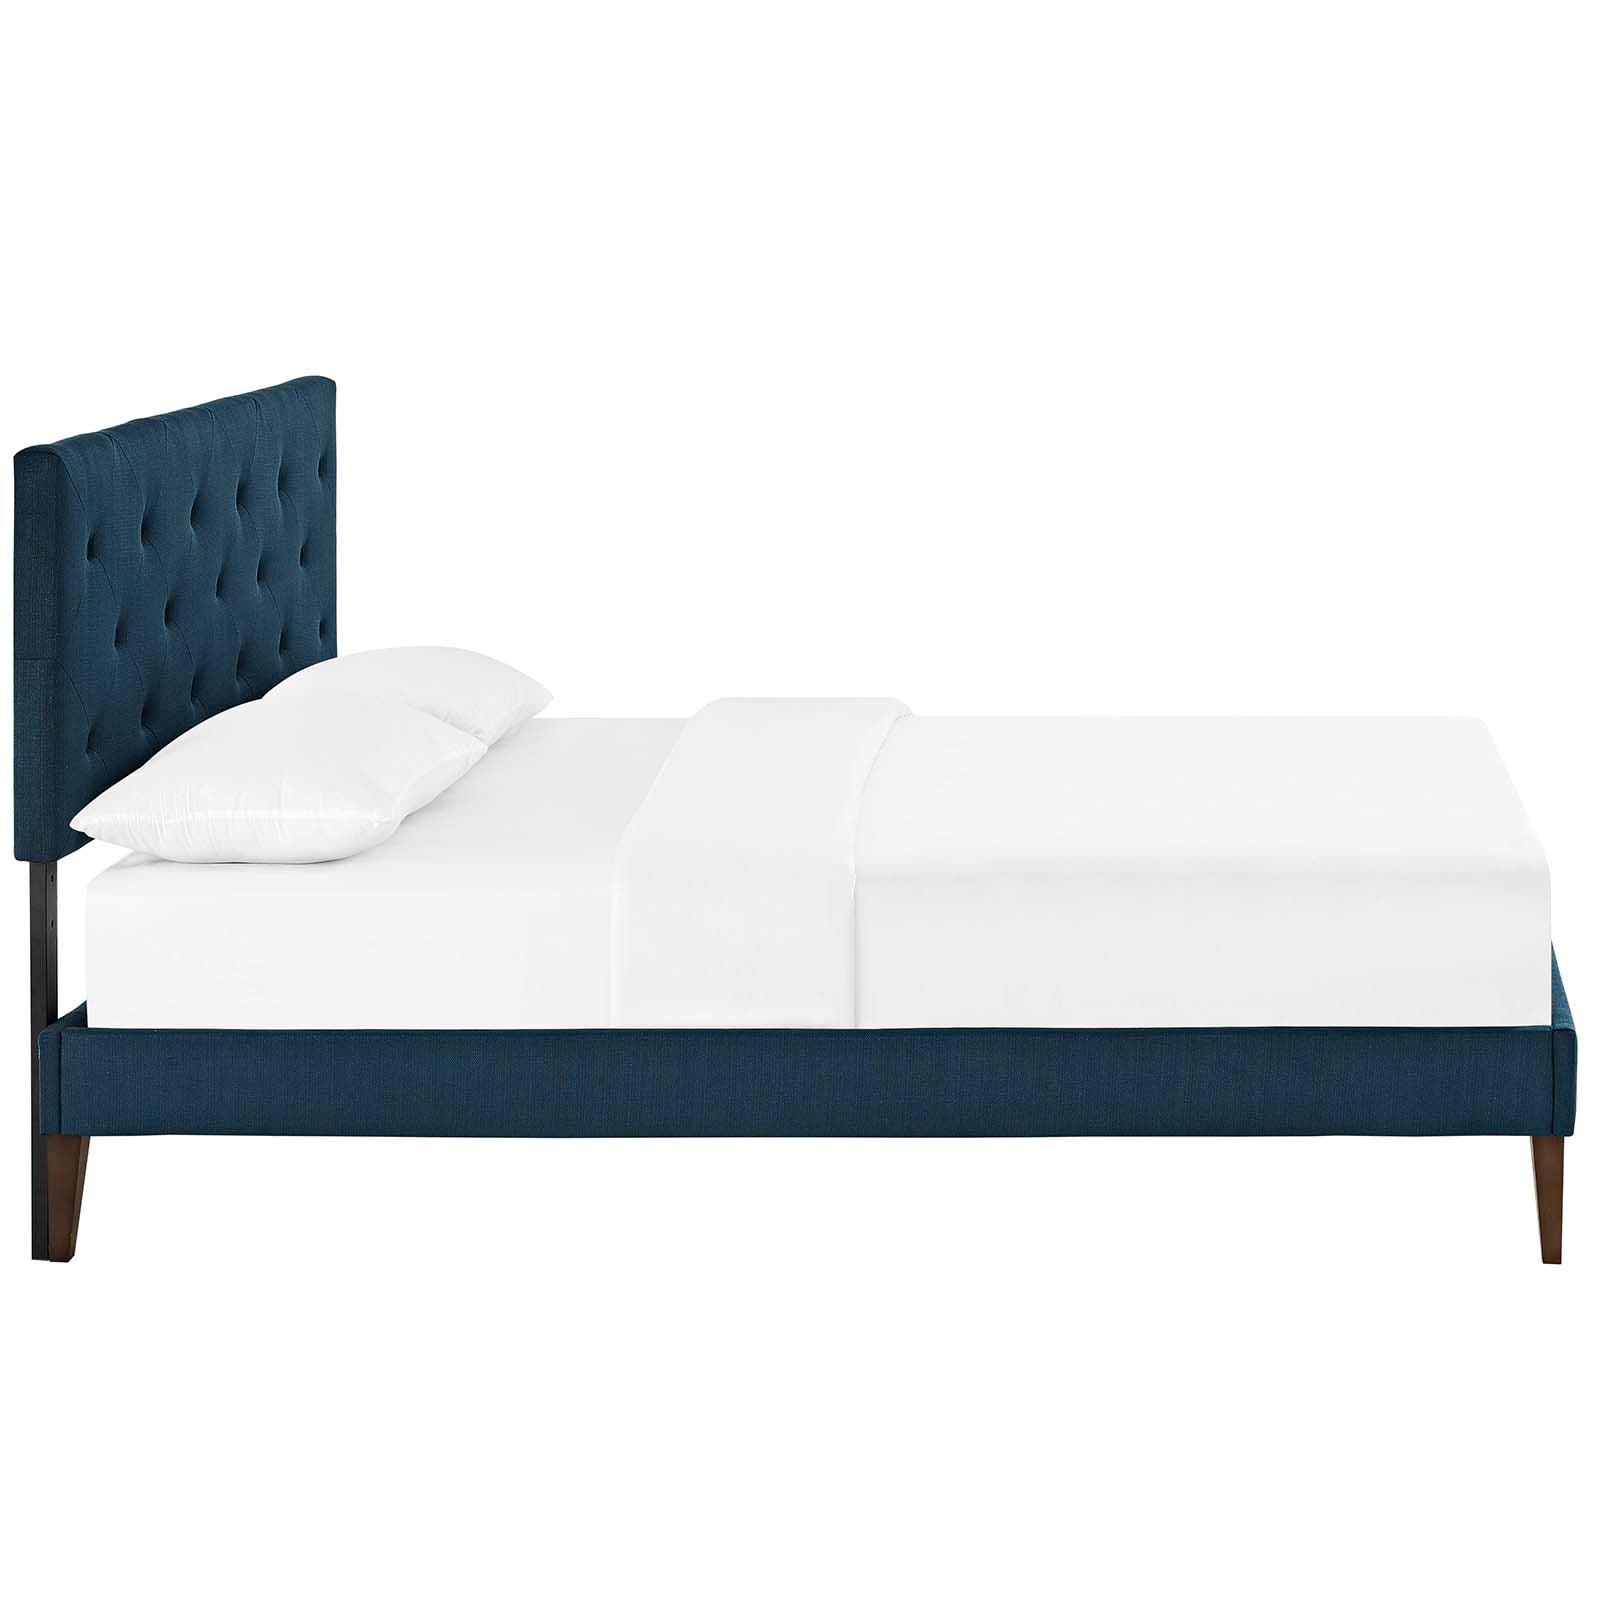 Tarah King Fabric Platform Bed with Squared Tapered Legs